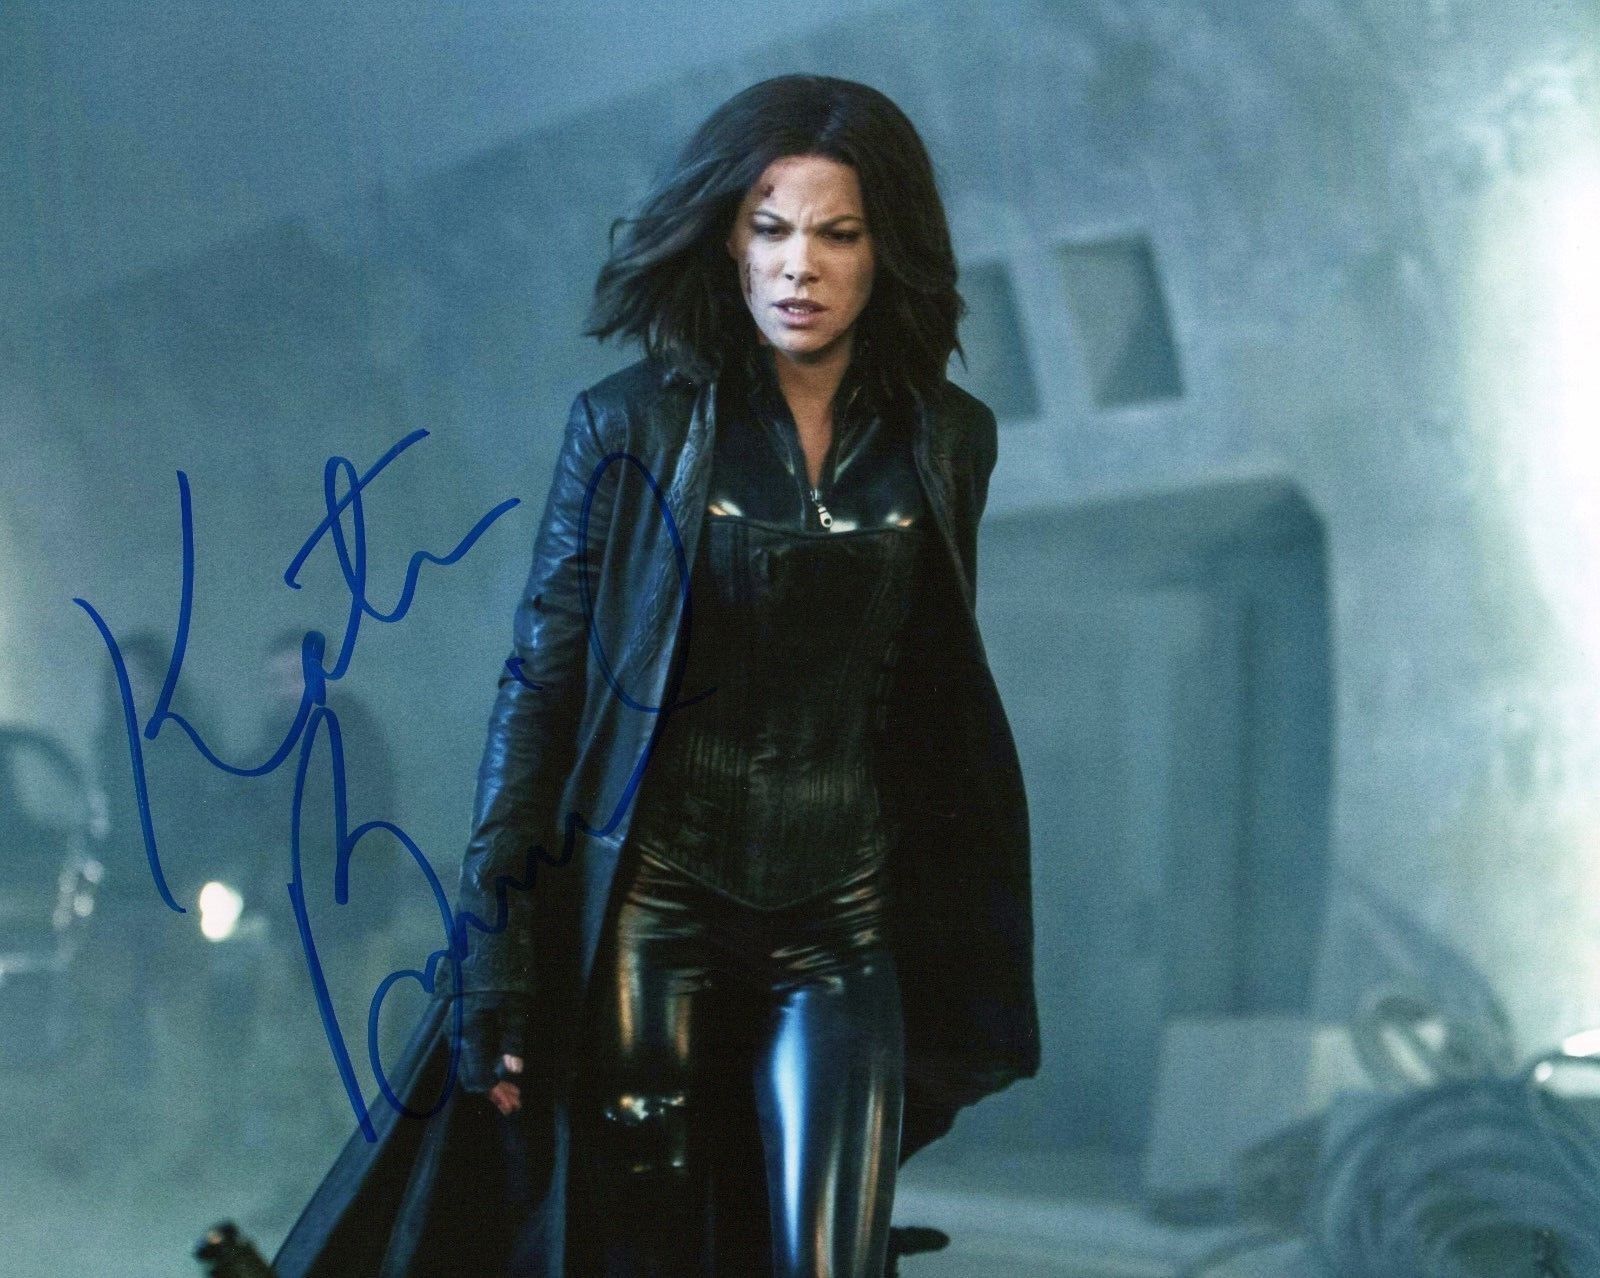 KATE BECKINSALE AUTOGRAPHED SIGNED A4 PP POSTER Photo Poster painting PRINT 30